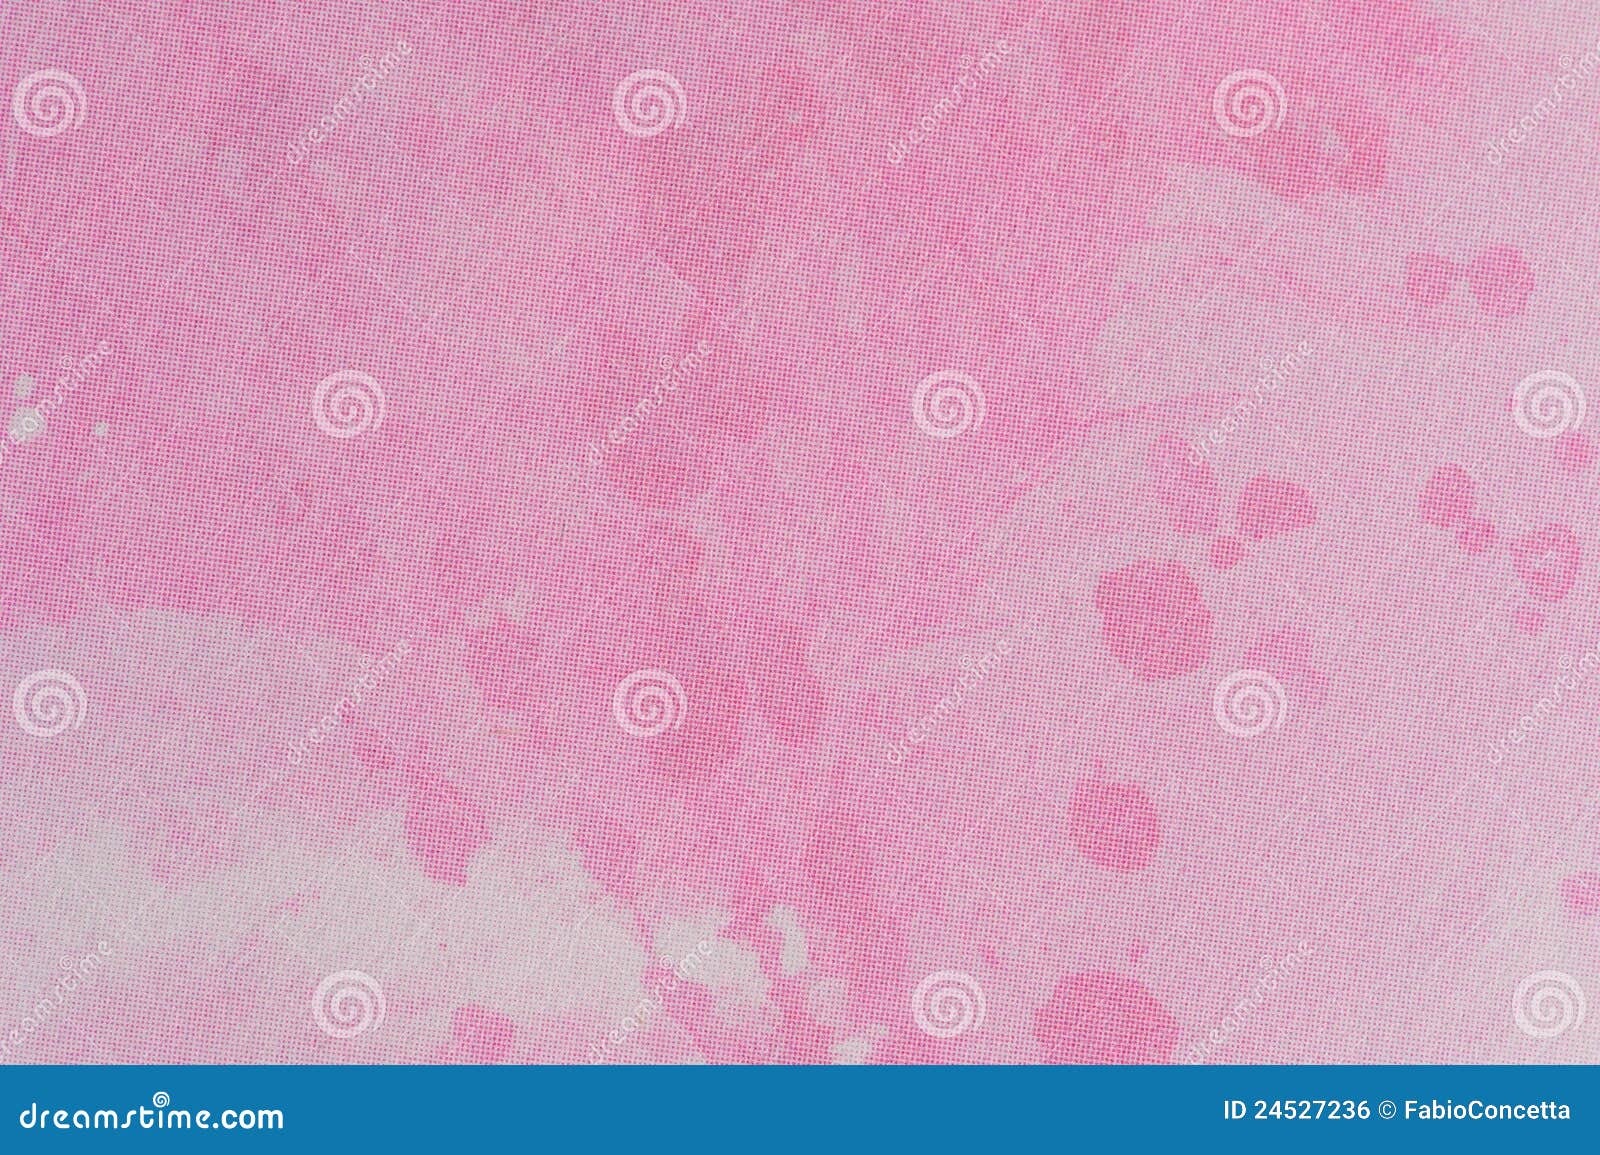 Pictorial Background Pink Editorial Photo - Image: 24527236